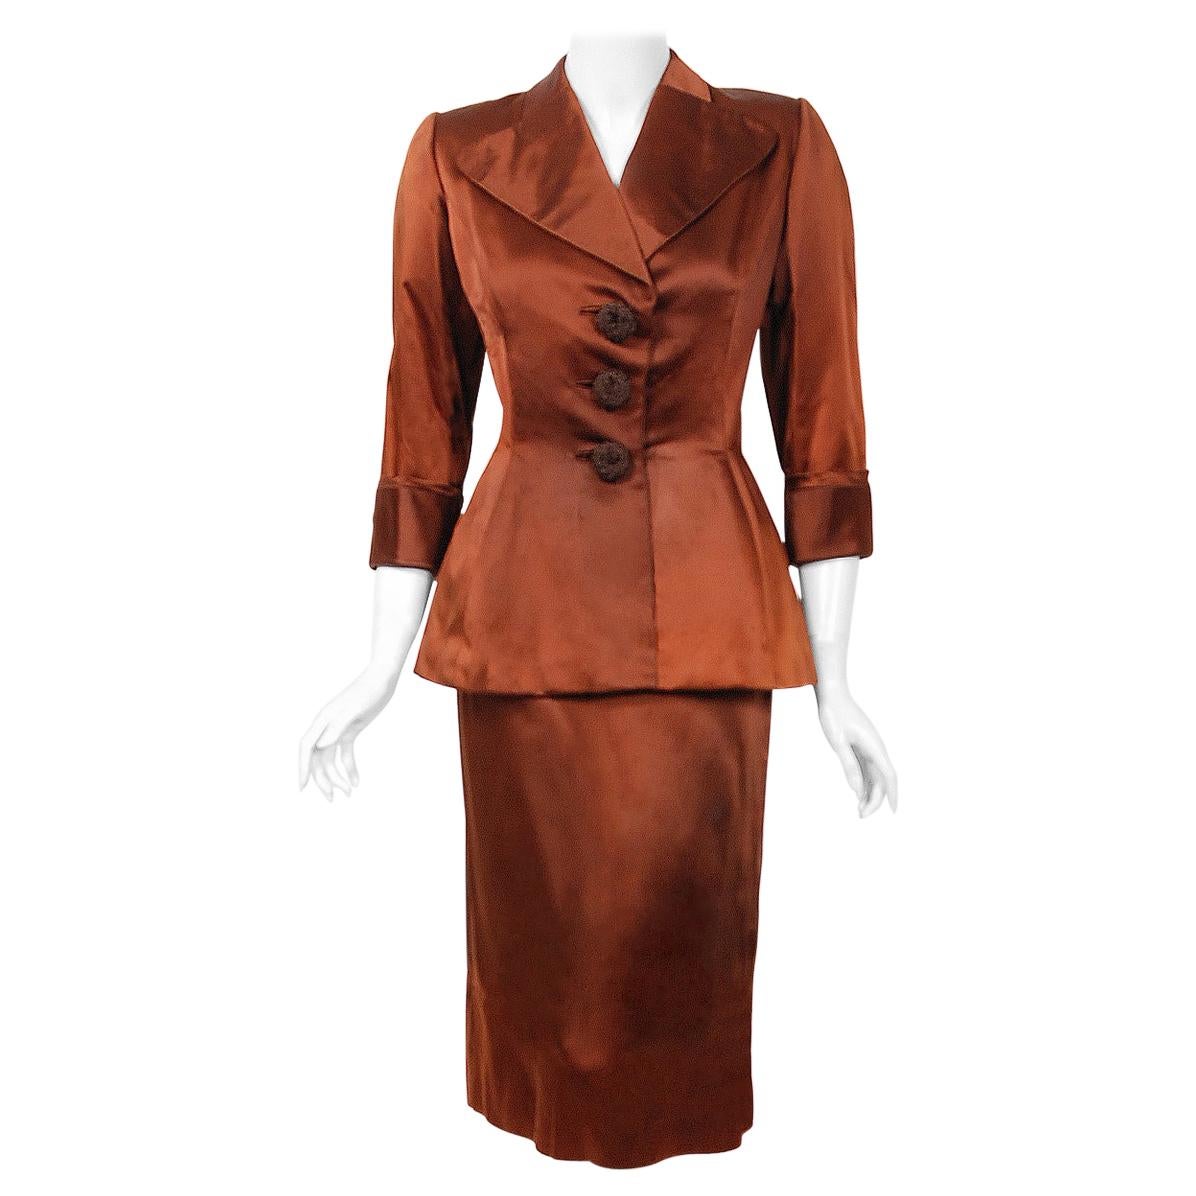 1946 Balenciaga Haute-Couture Copper Satin Tailored Peplum Jacket and Skirt Suit